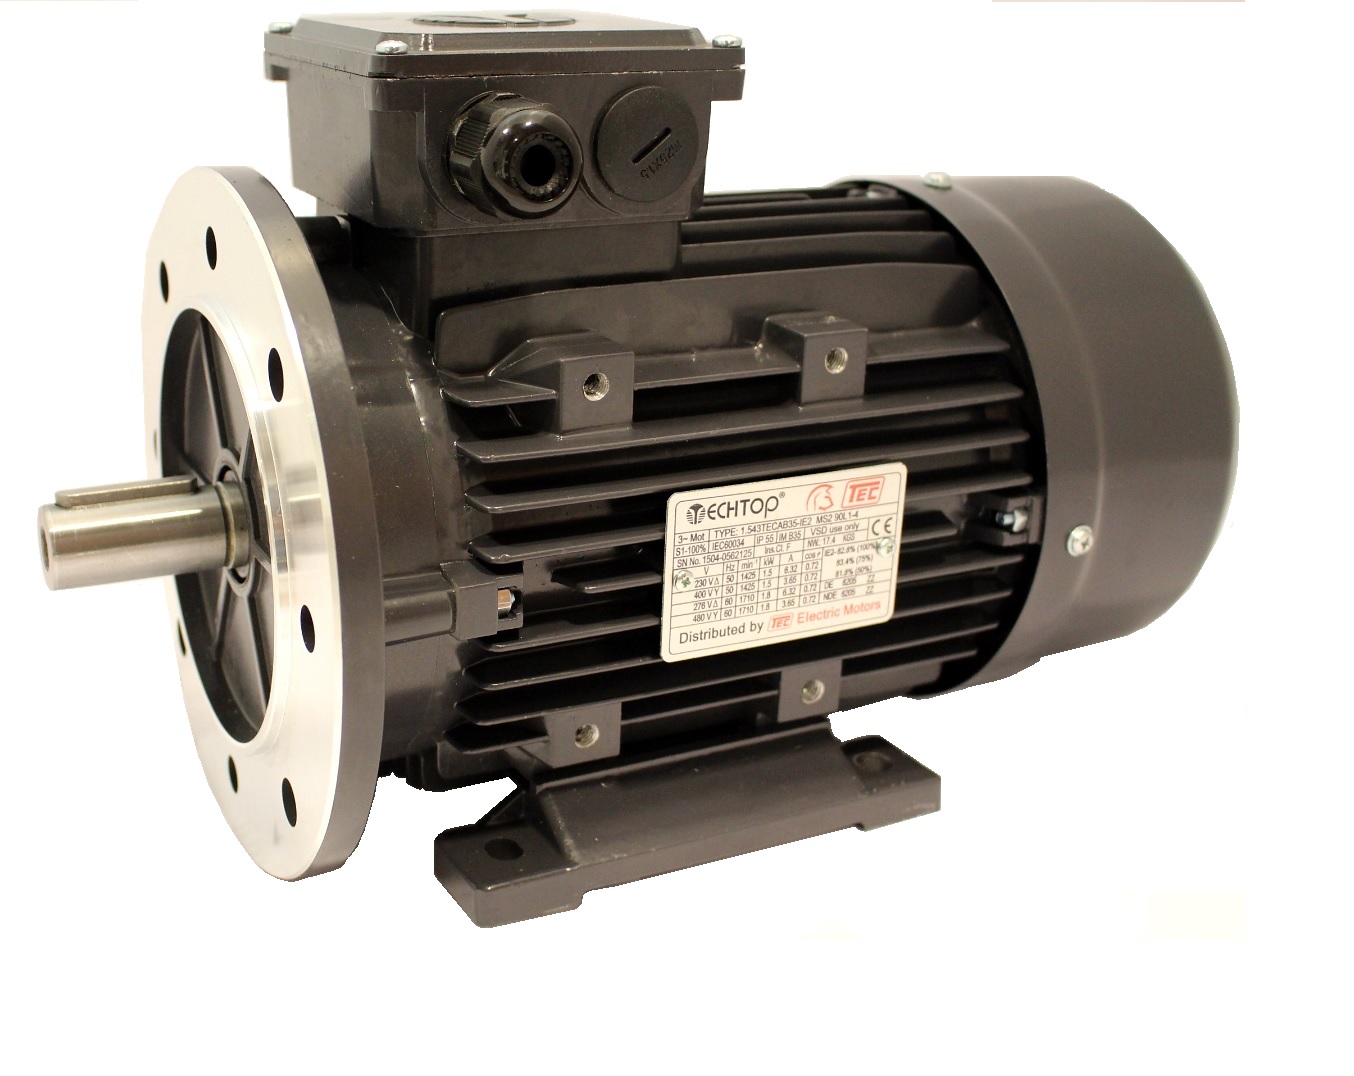 Three Phase 400v Electric Motor, 2.2Kw 2 pole 3000rpm with flange and foot mount IE3